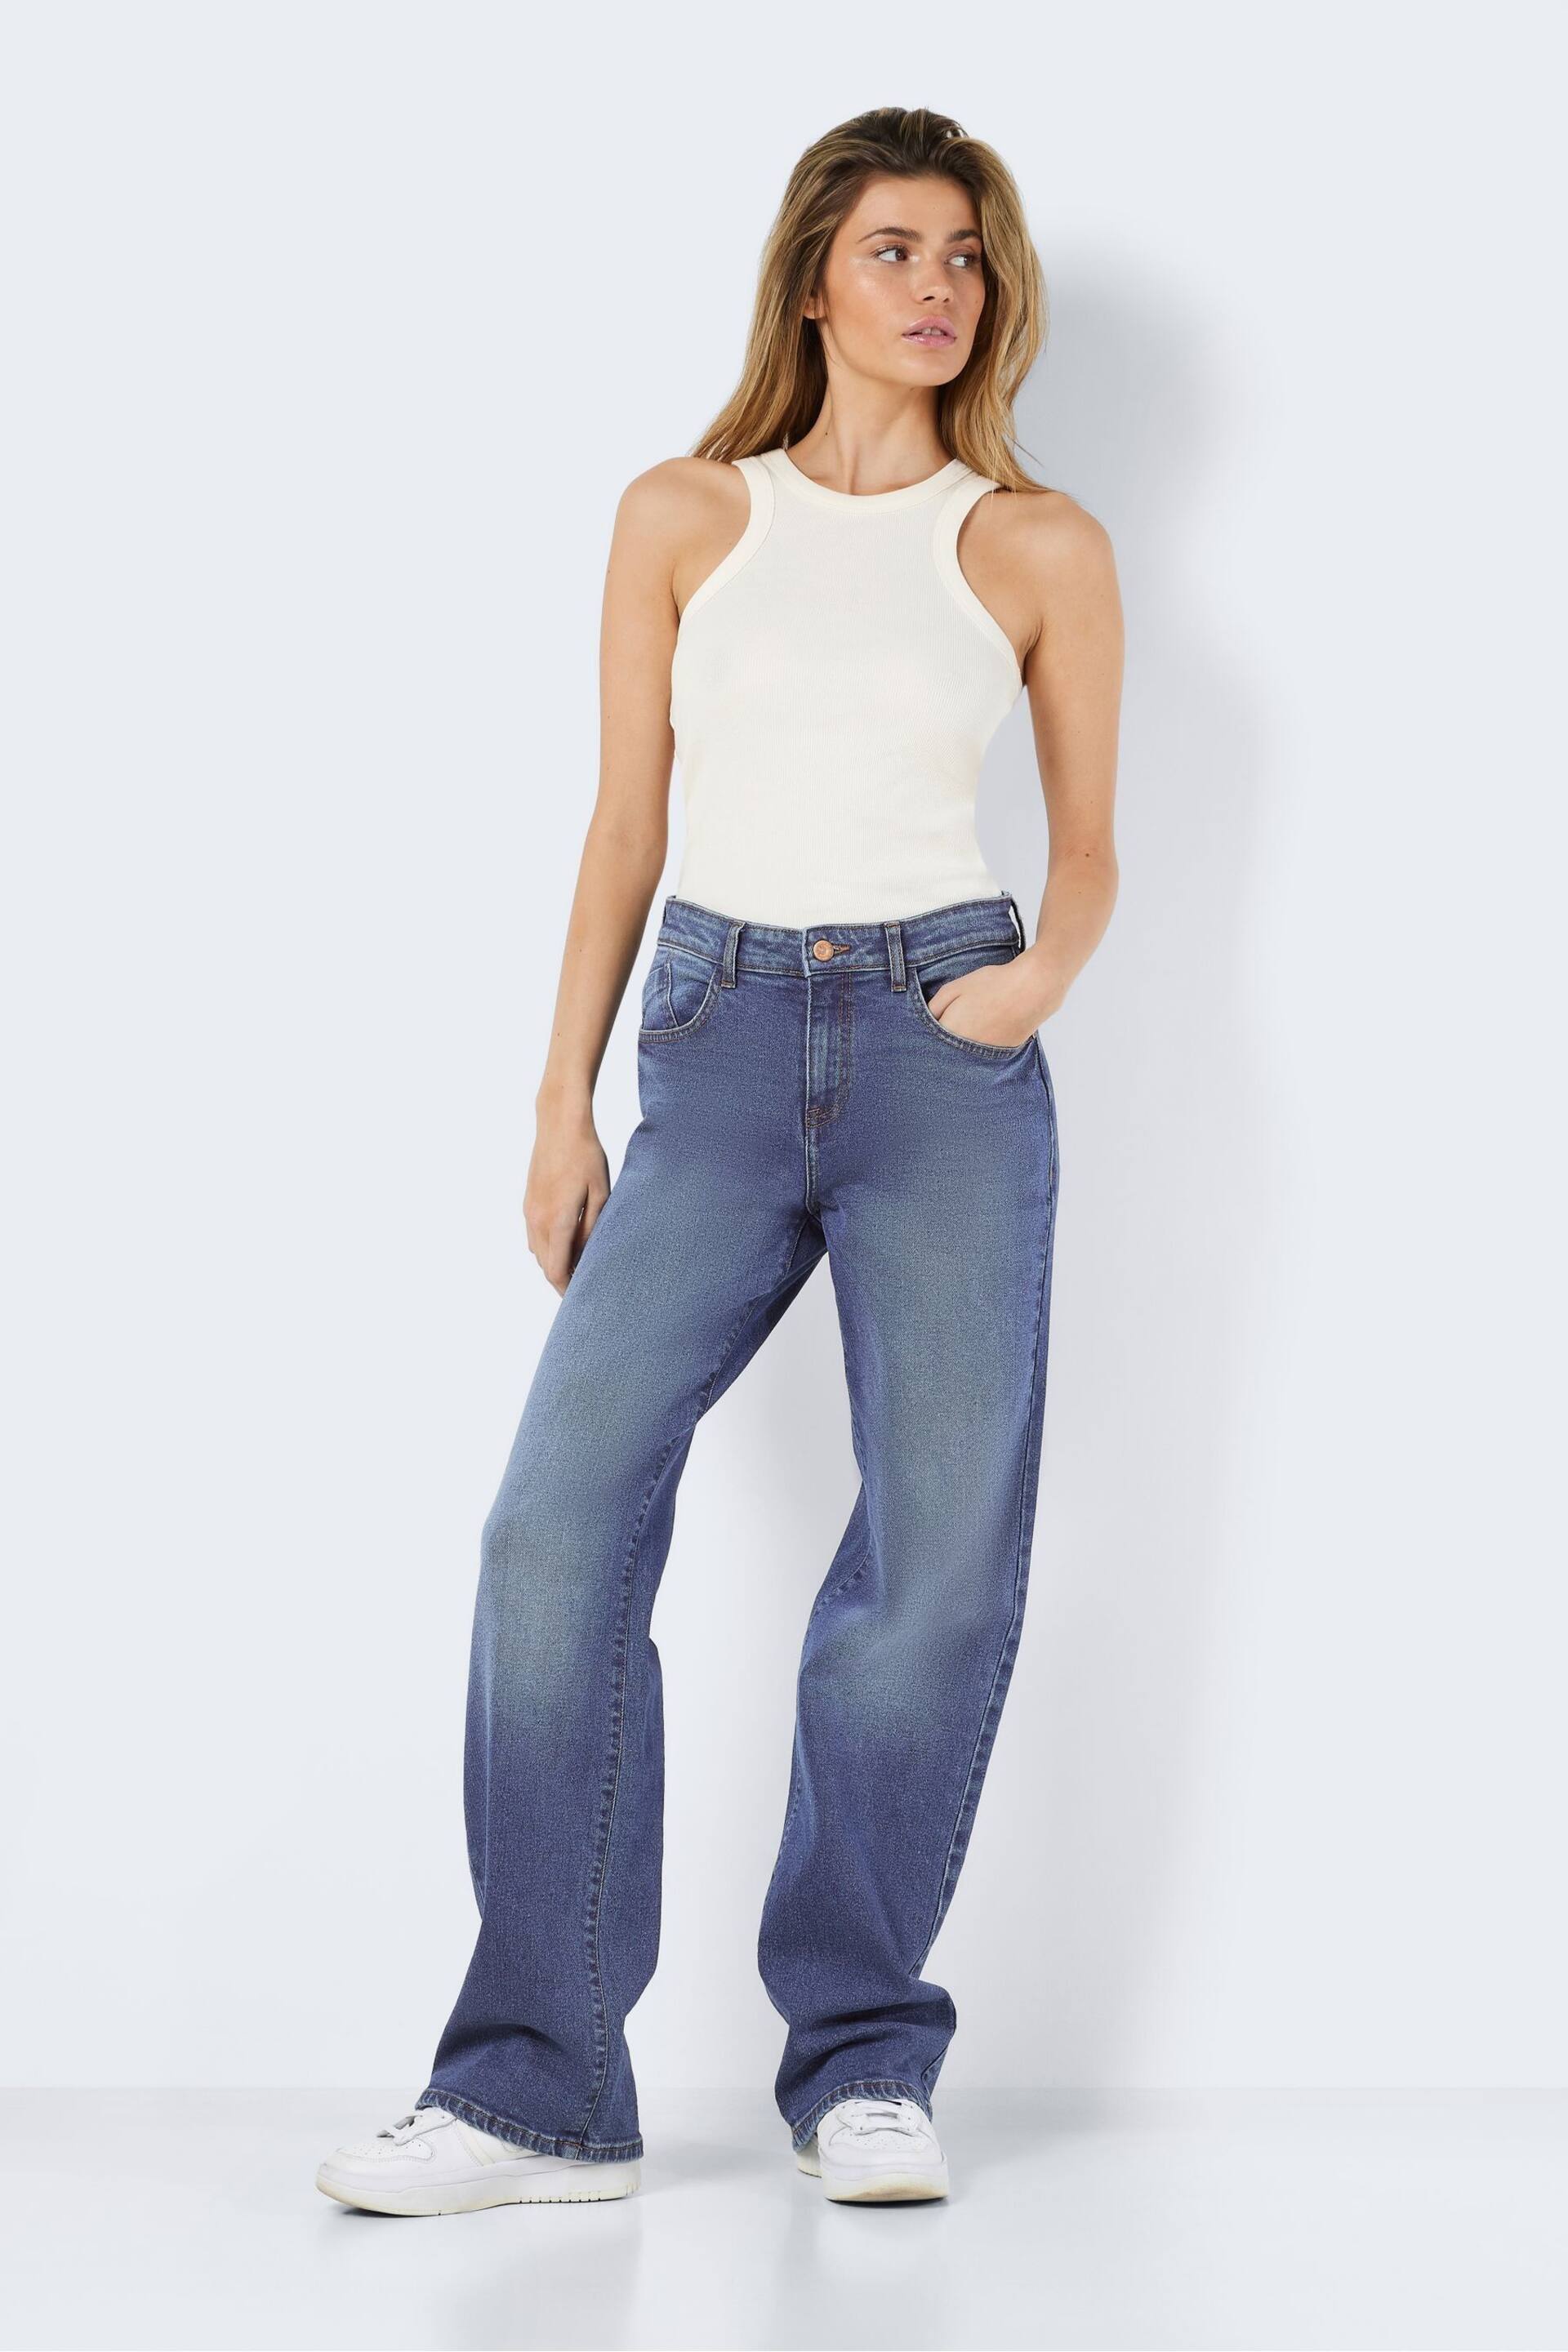 NOISY MAY Blue High Waisted Wide Leg Jeans - Image 2 of 8